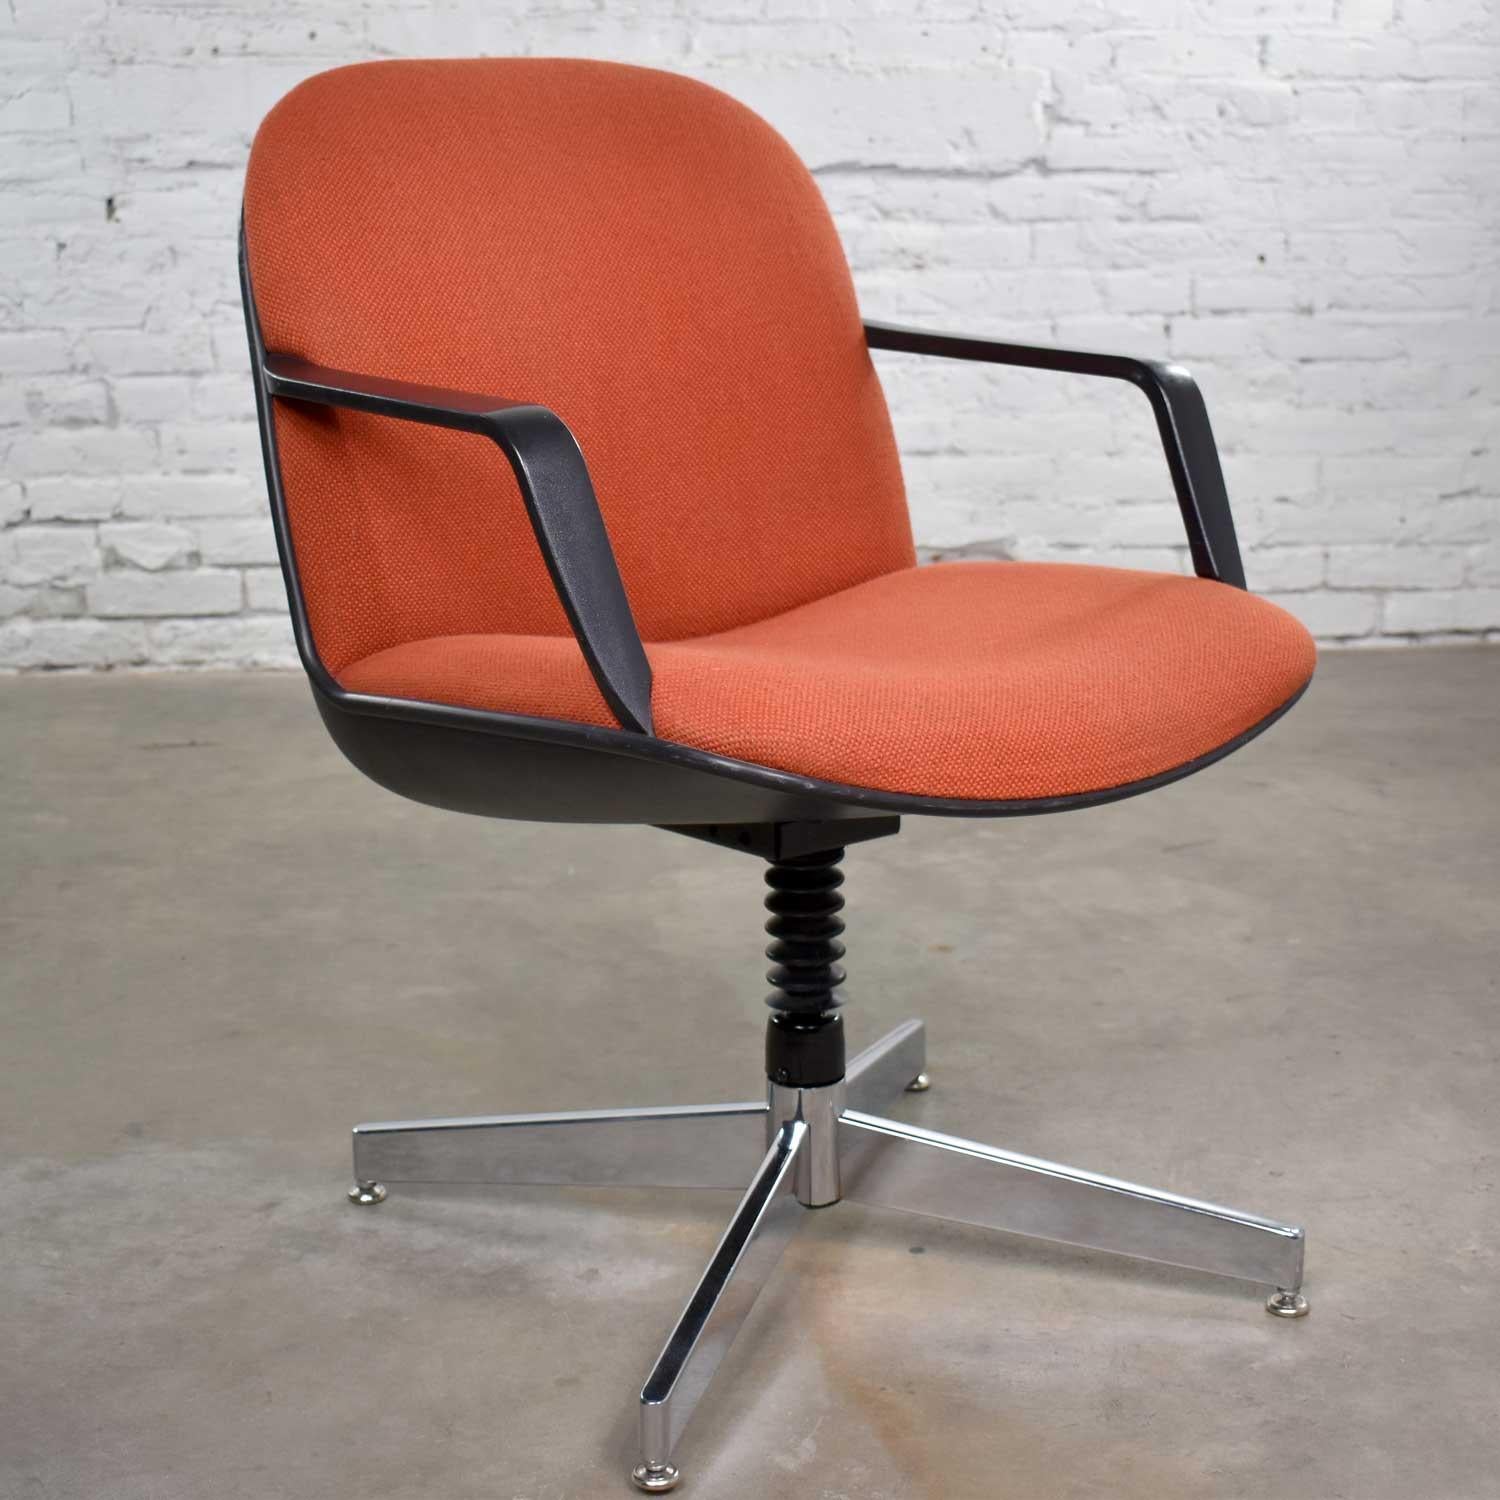 Handsome orange hopsack fabric covered armchair with adjustable height in the style of the Charles Pollock chair for Knoll. It is in wonderful vintage condition with no outstanding flaws and only normal wear for its age. Please see photos. Circa